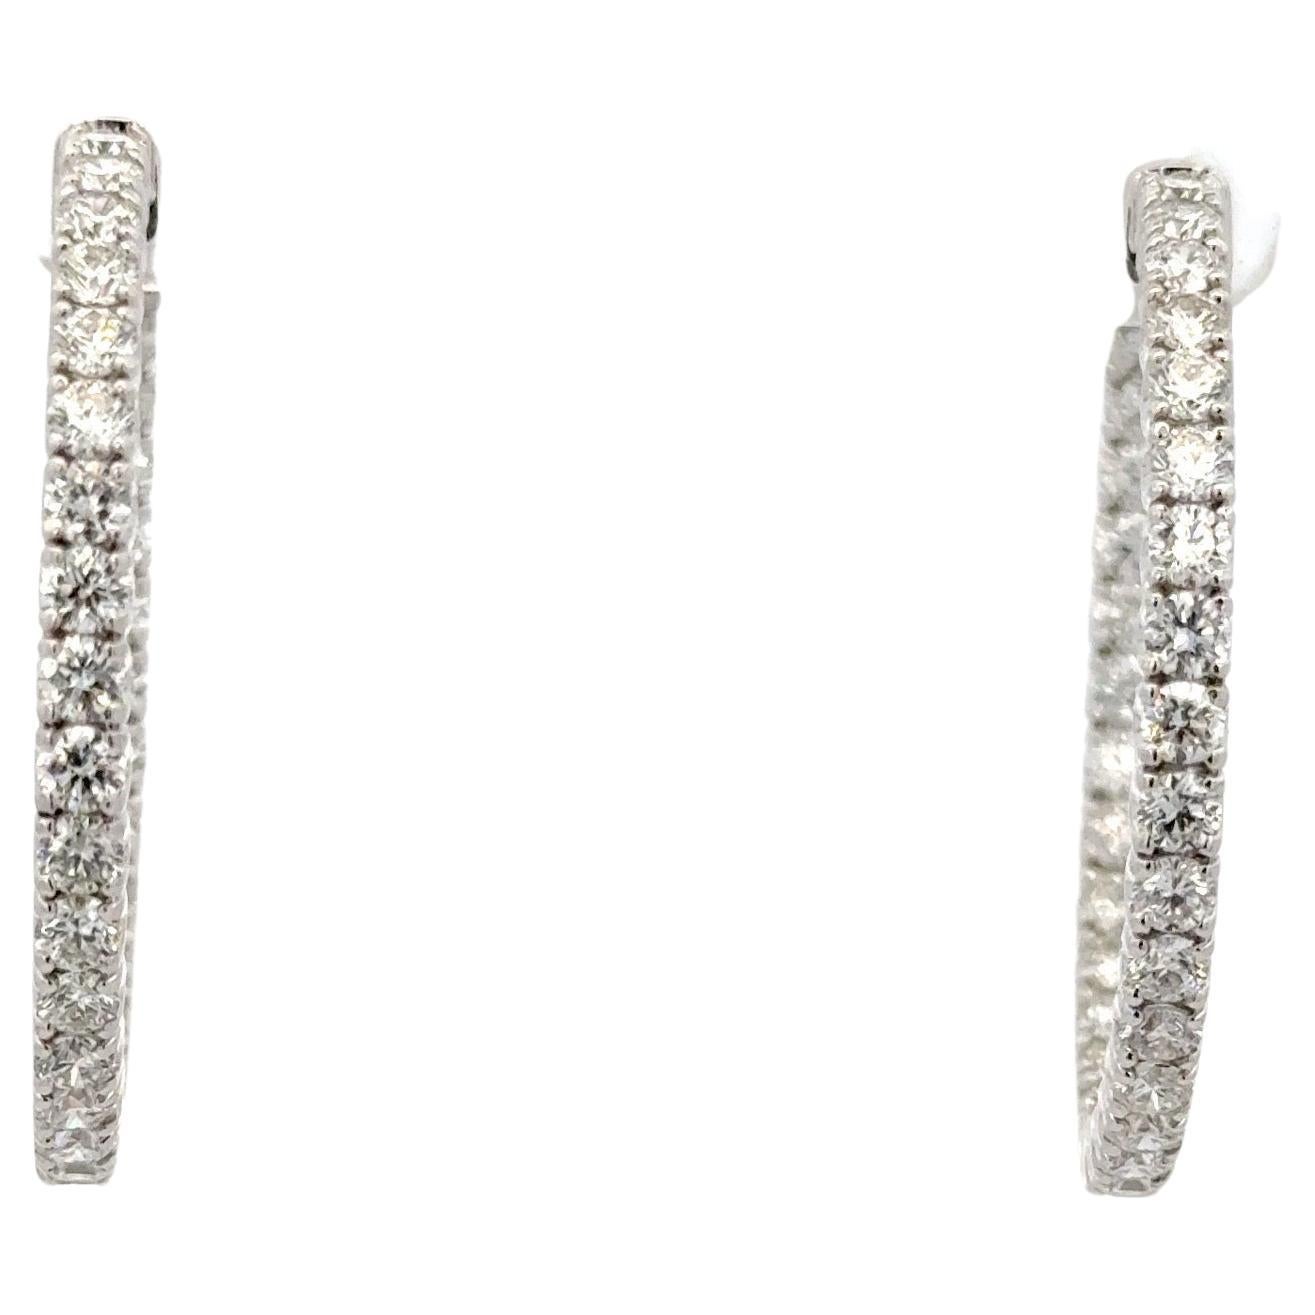 Diamond Hoop Earrings 4.61 Carats U Prong 14 Karat White Gold Average 0.08 CTS In New Condition For Sale In New York, NY